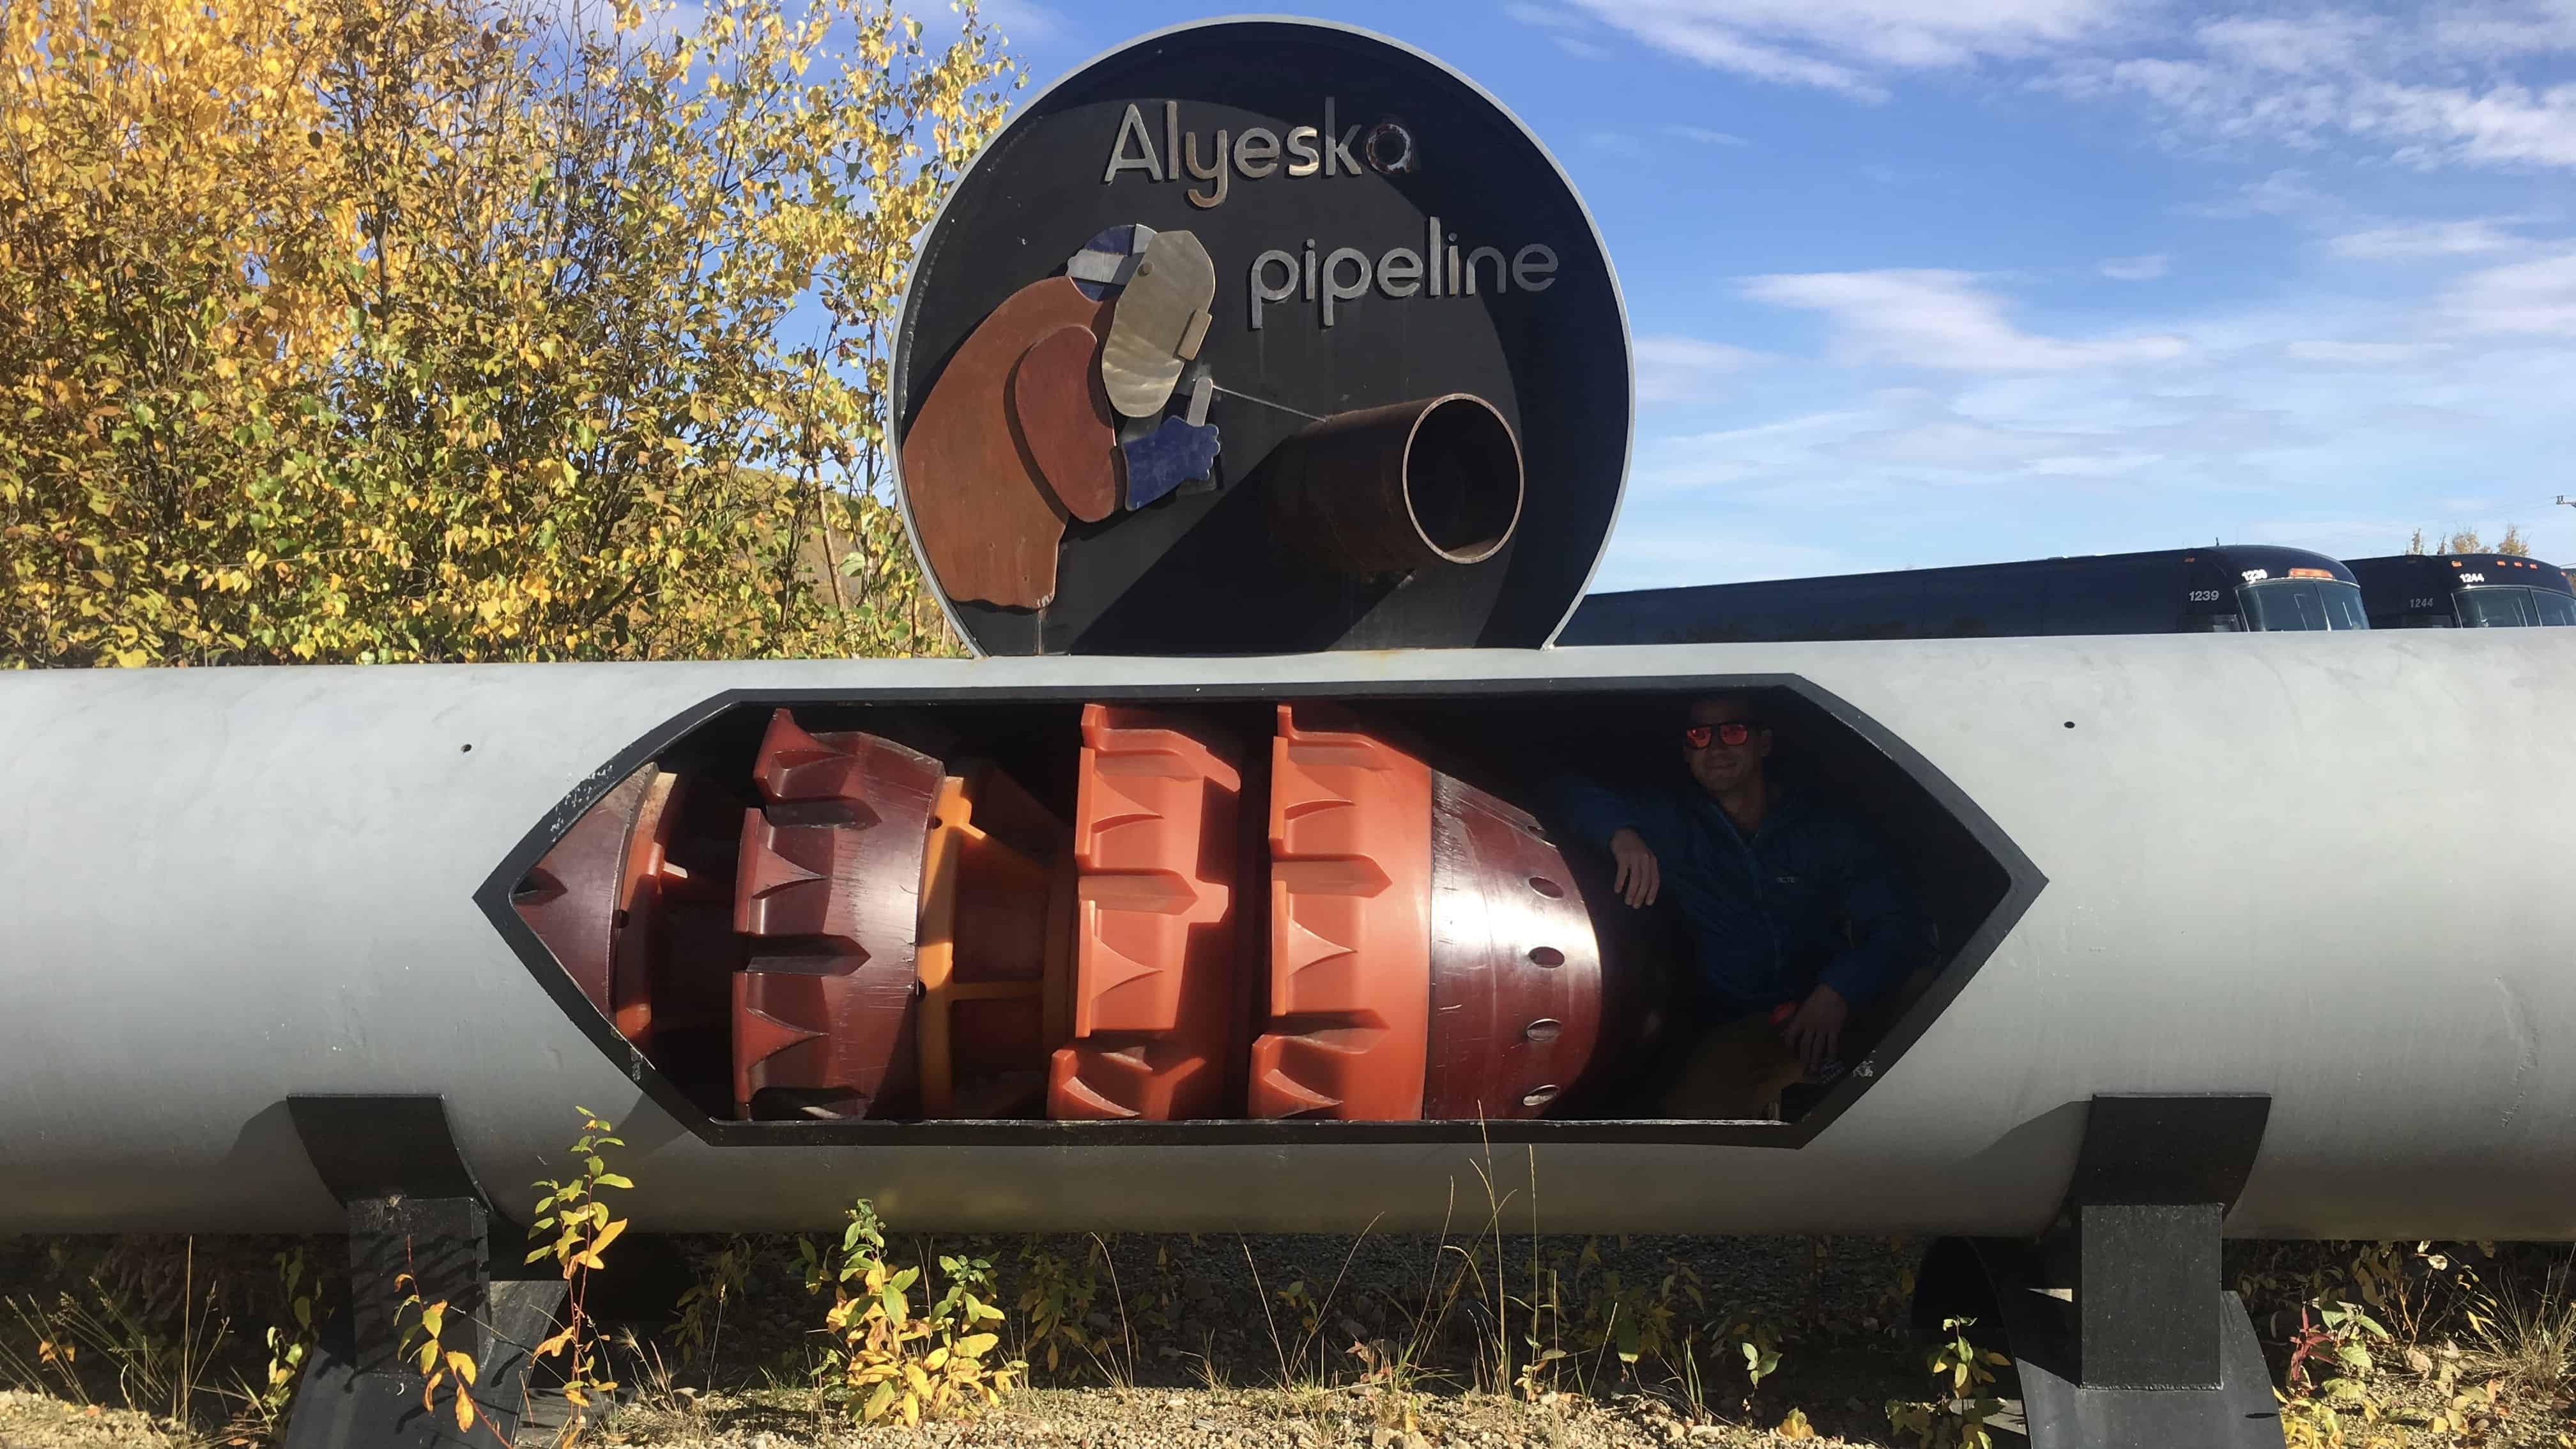 Cleaning pigs in the Alaska Pipeline